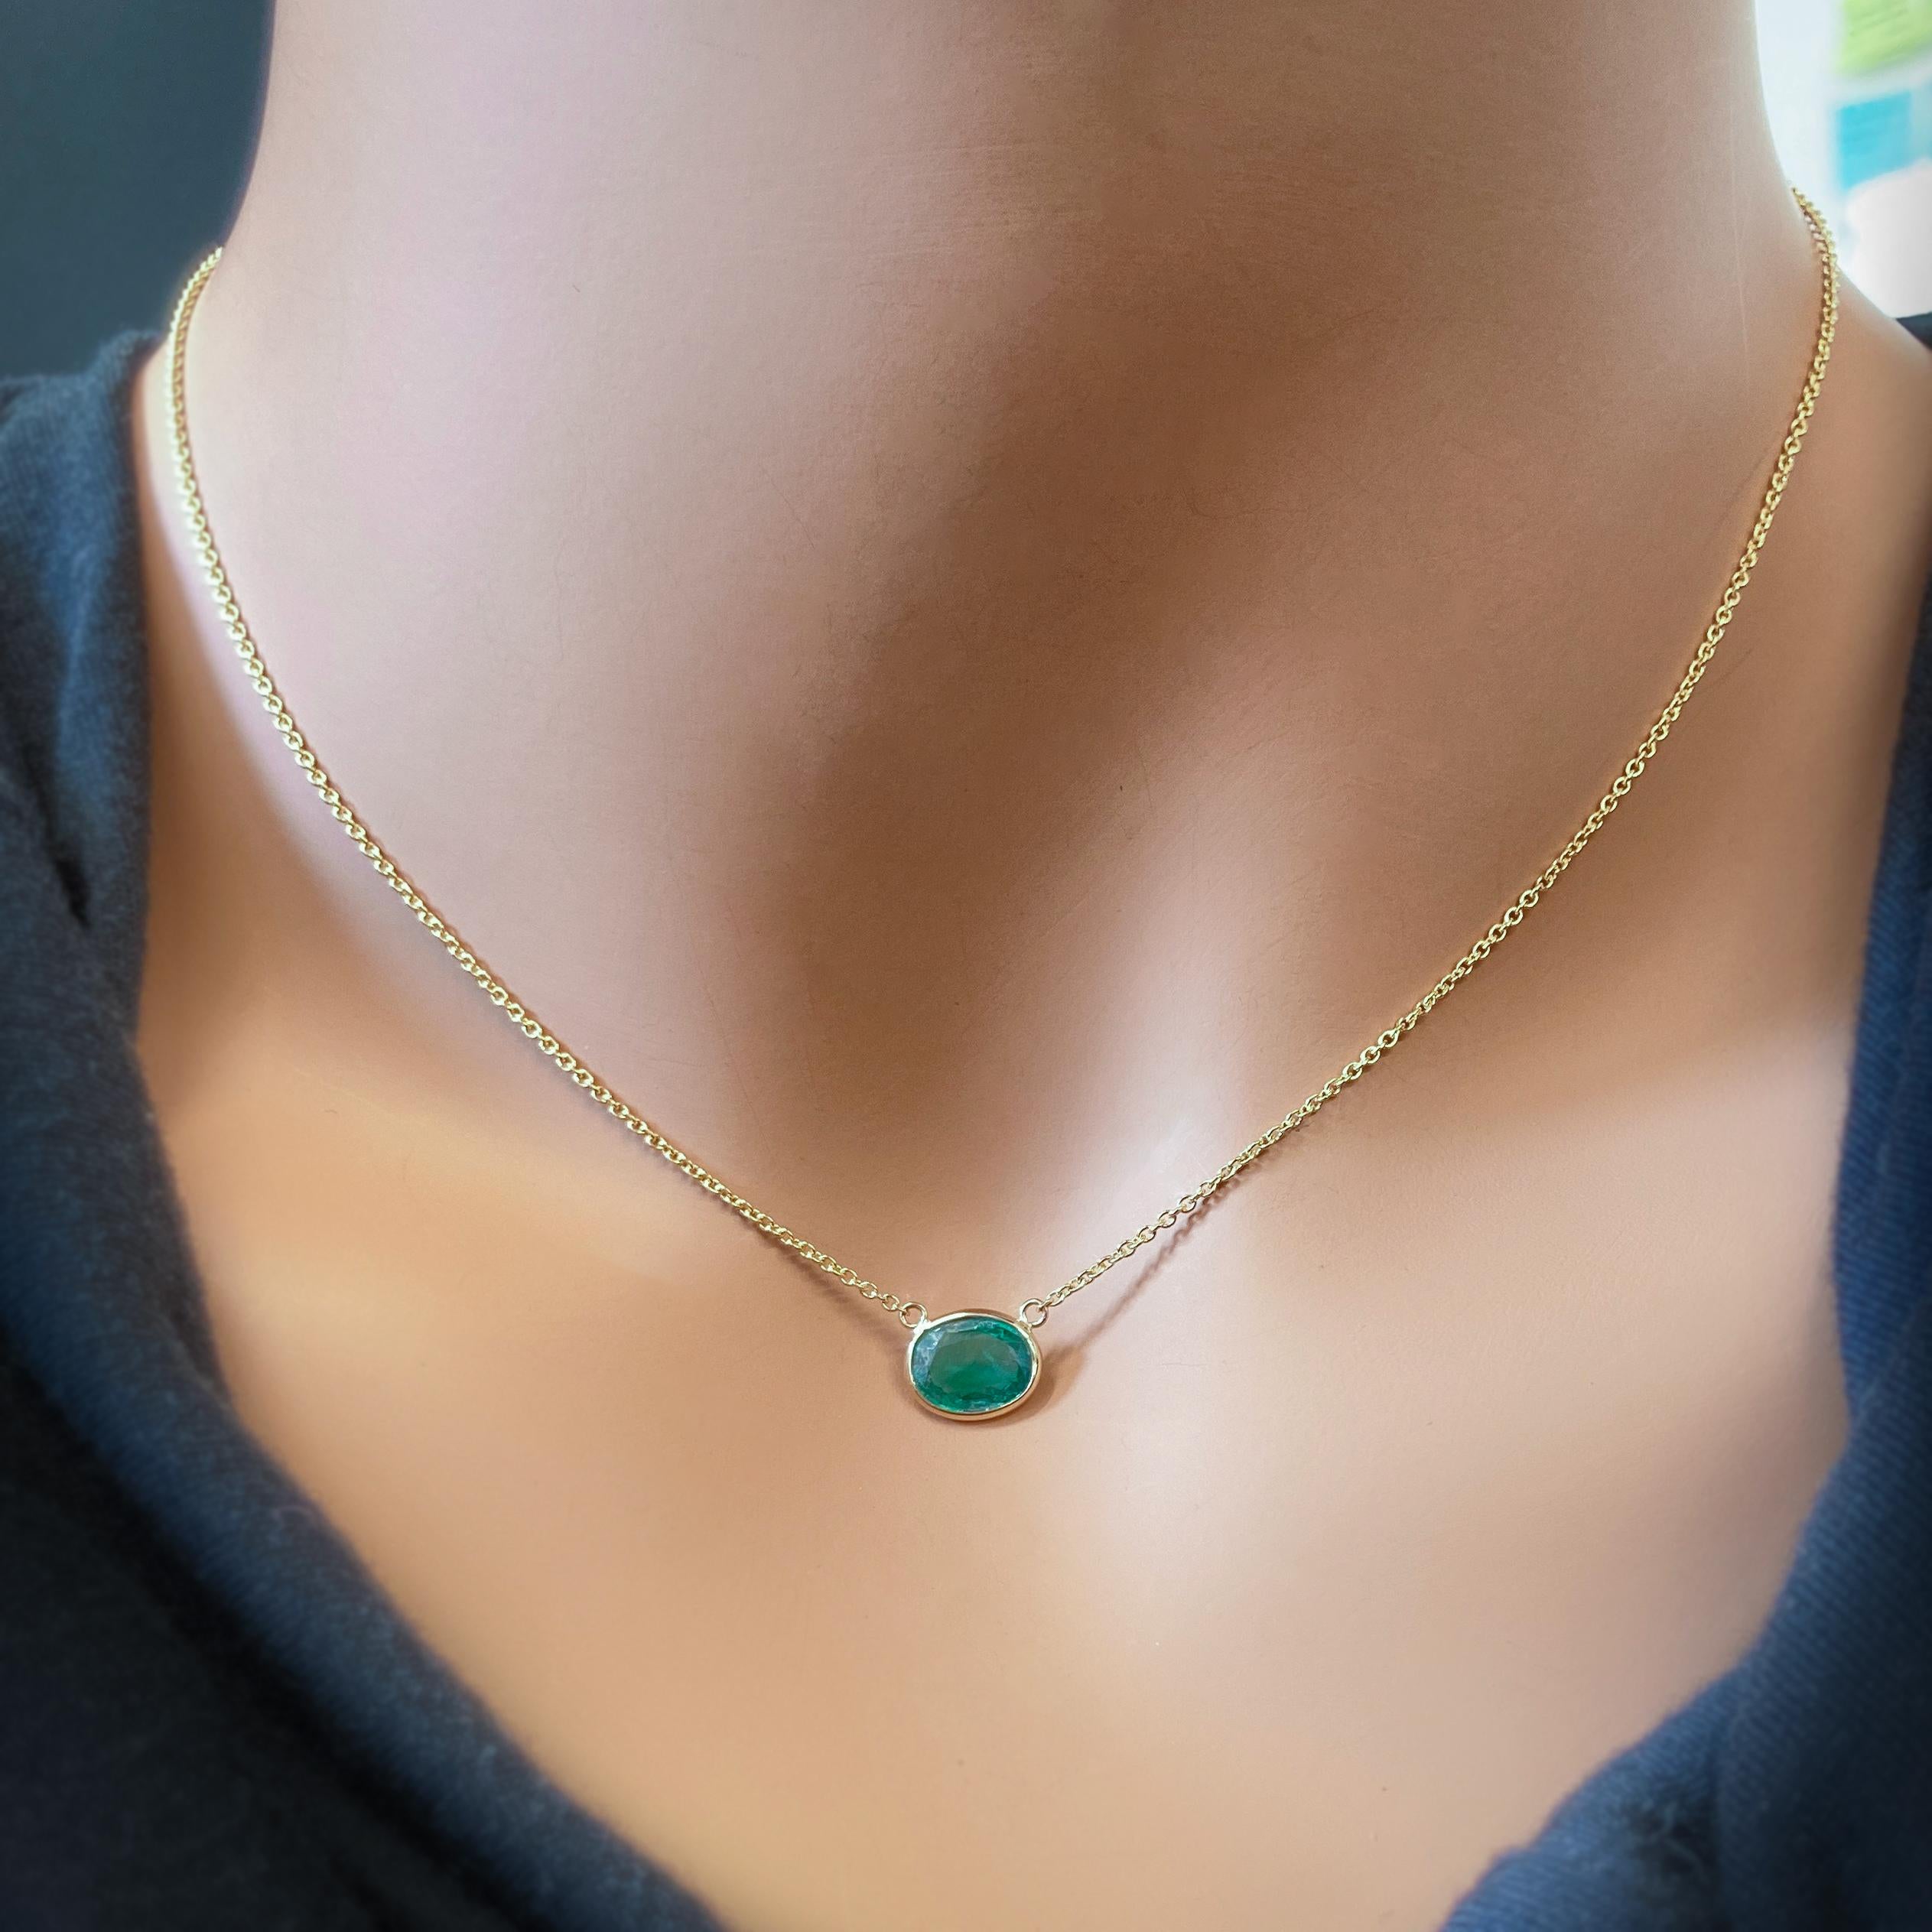 Contemporary 1.41 Carat Green Emerald Oval Cut Fashion Necklaces In 14K Yellow Gold For Sale